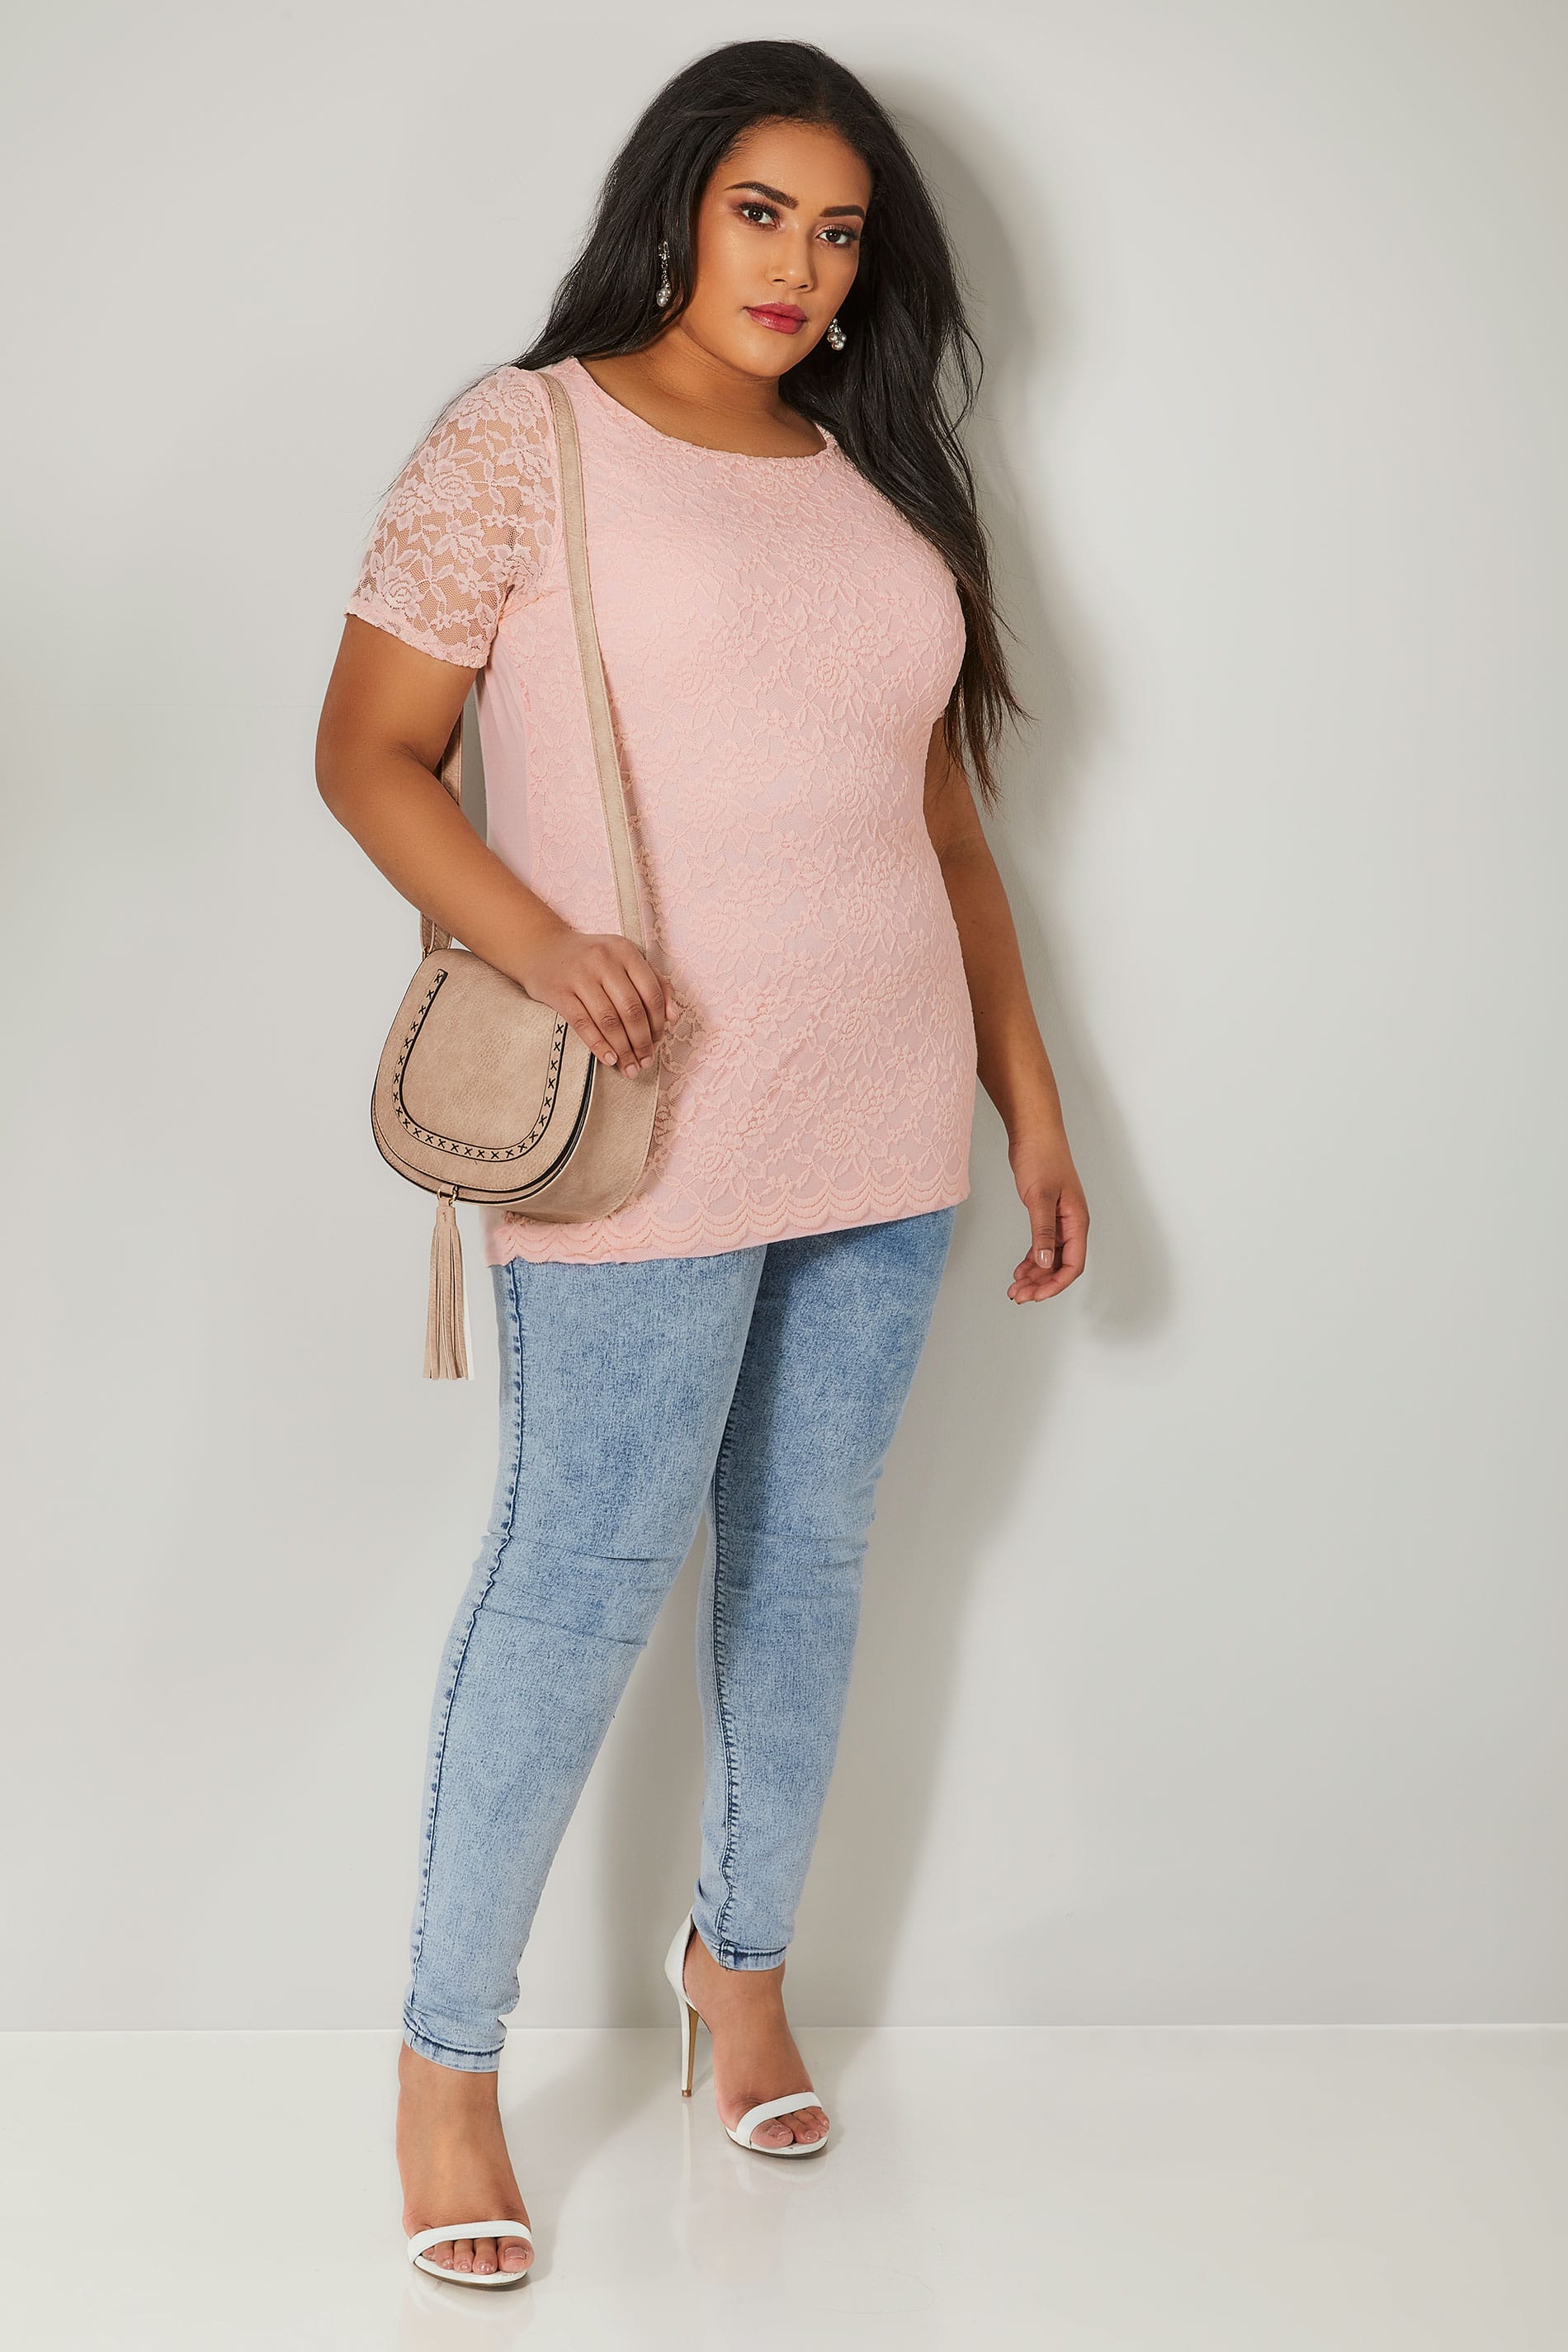 Nude Pink Lace Front Stretch Jersey Top With Scalloped Hem Plus Size